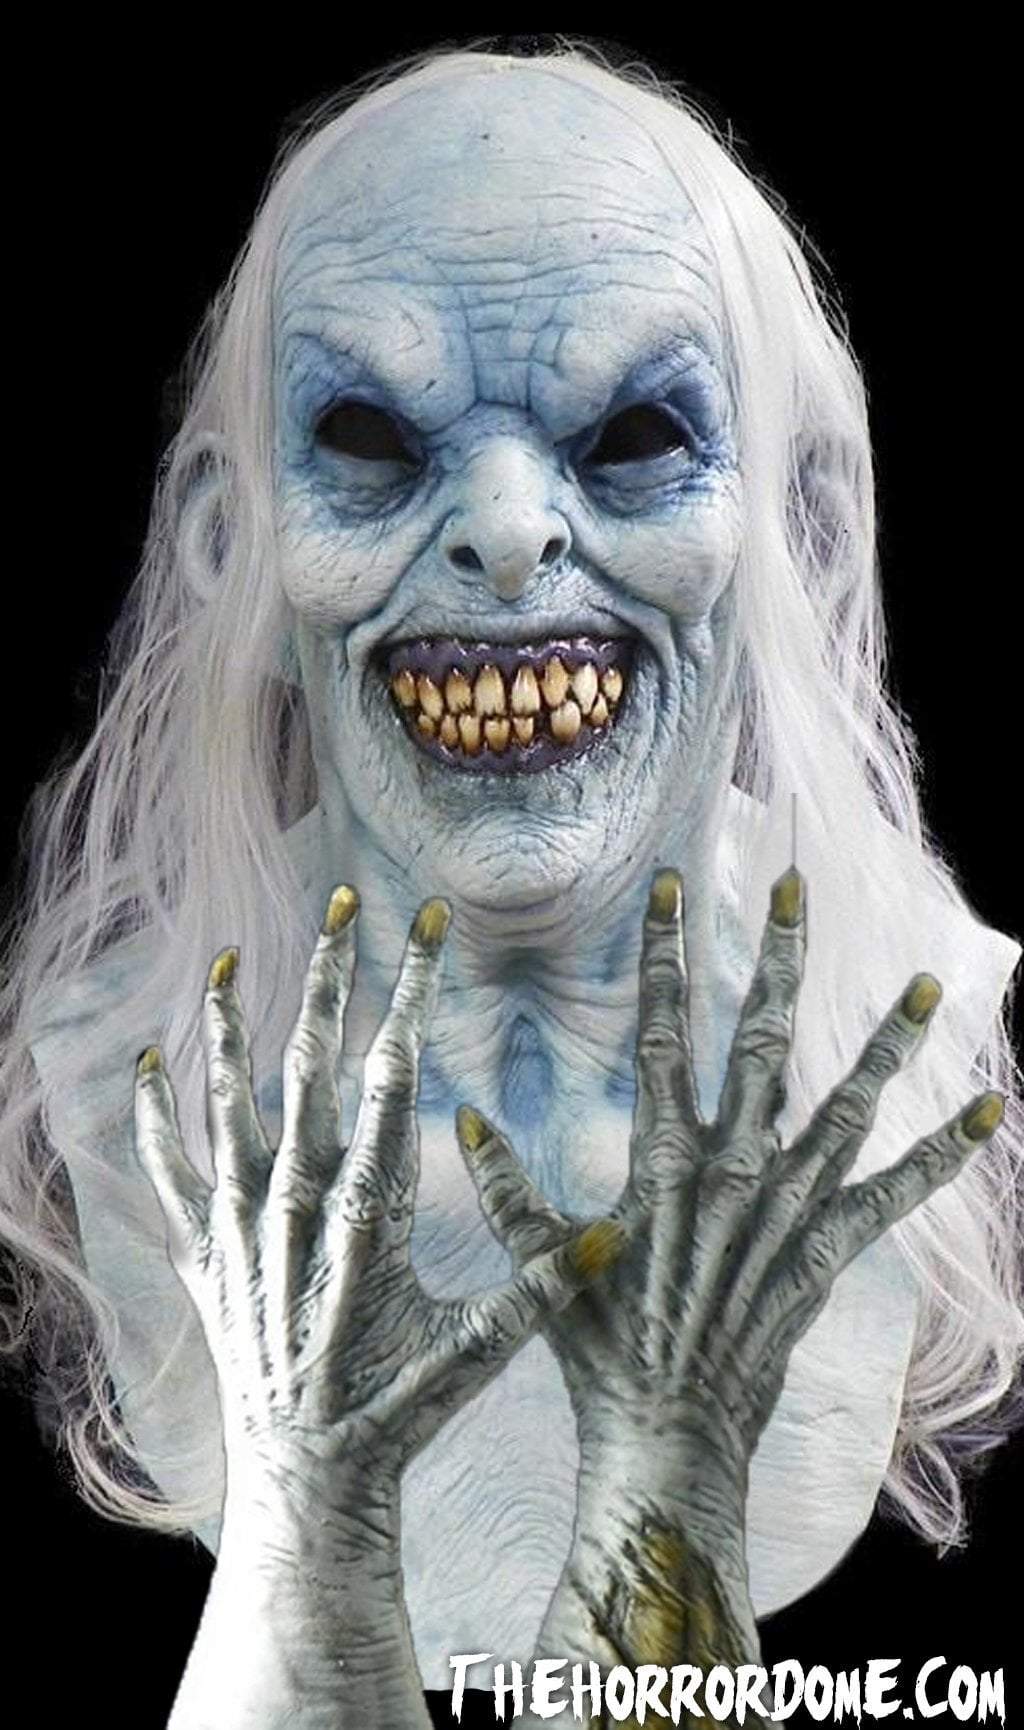 "Female Apparation" HD Studios Pro Halloween Mask and Hands Set